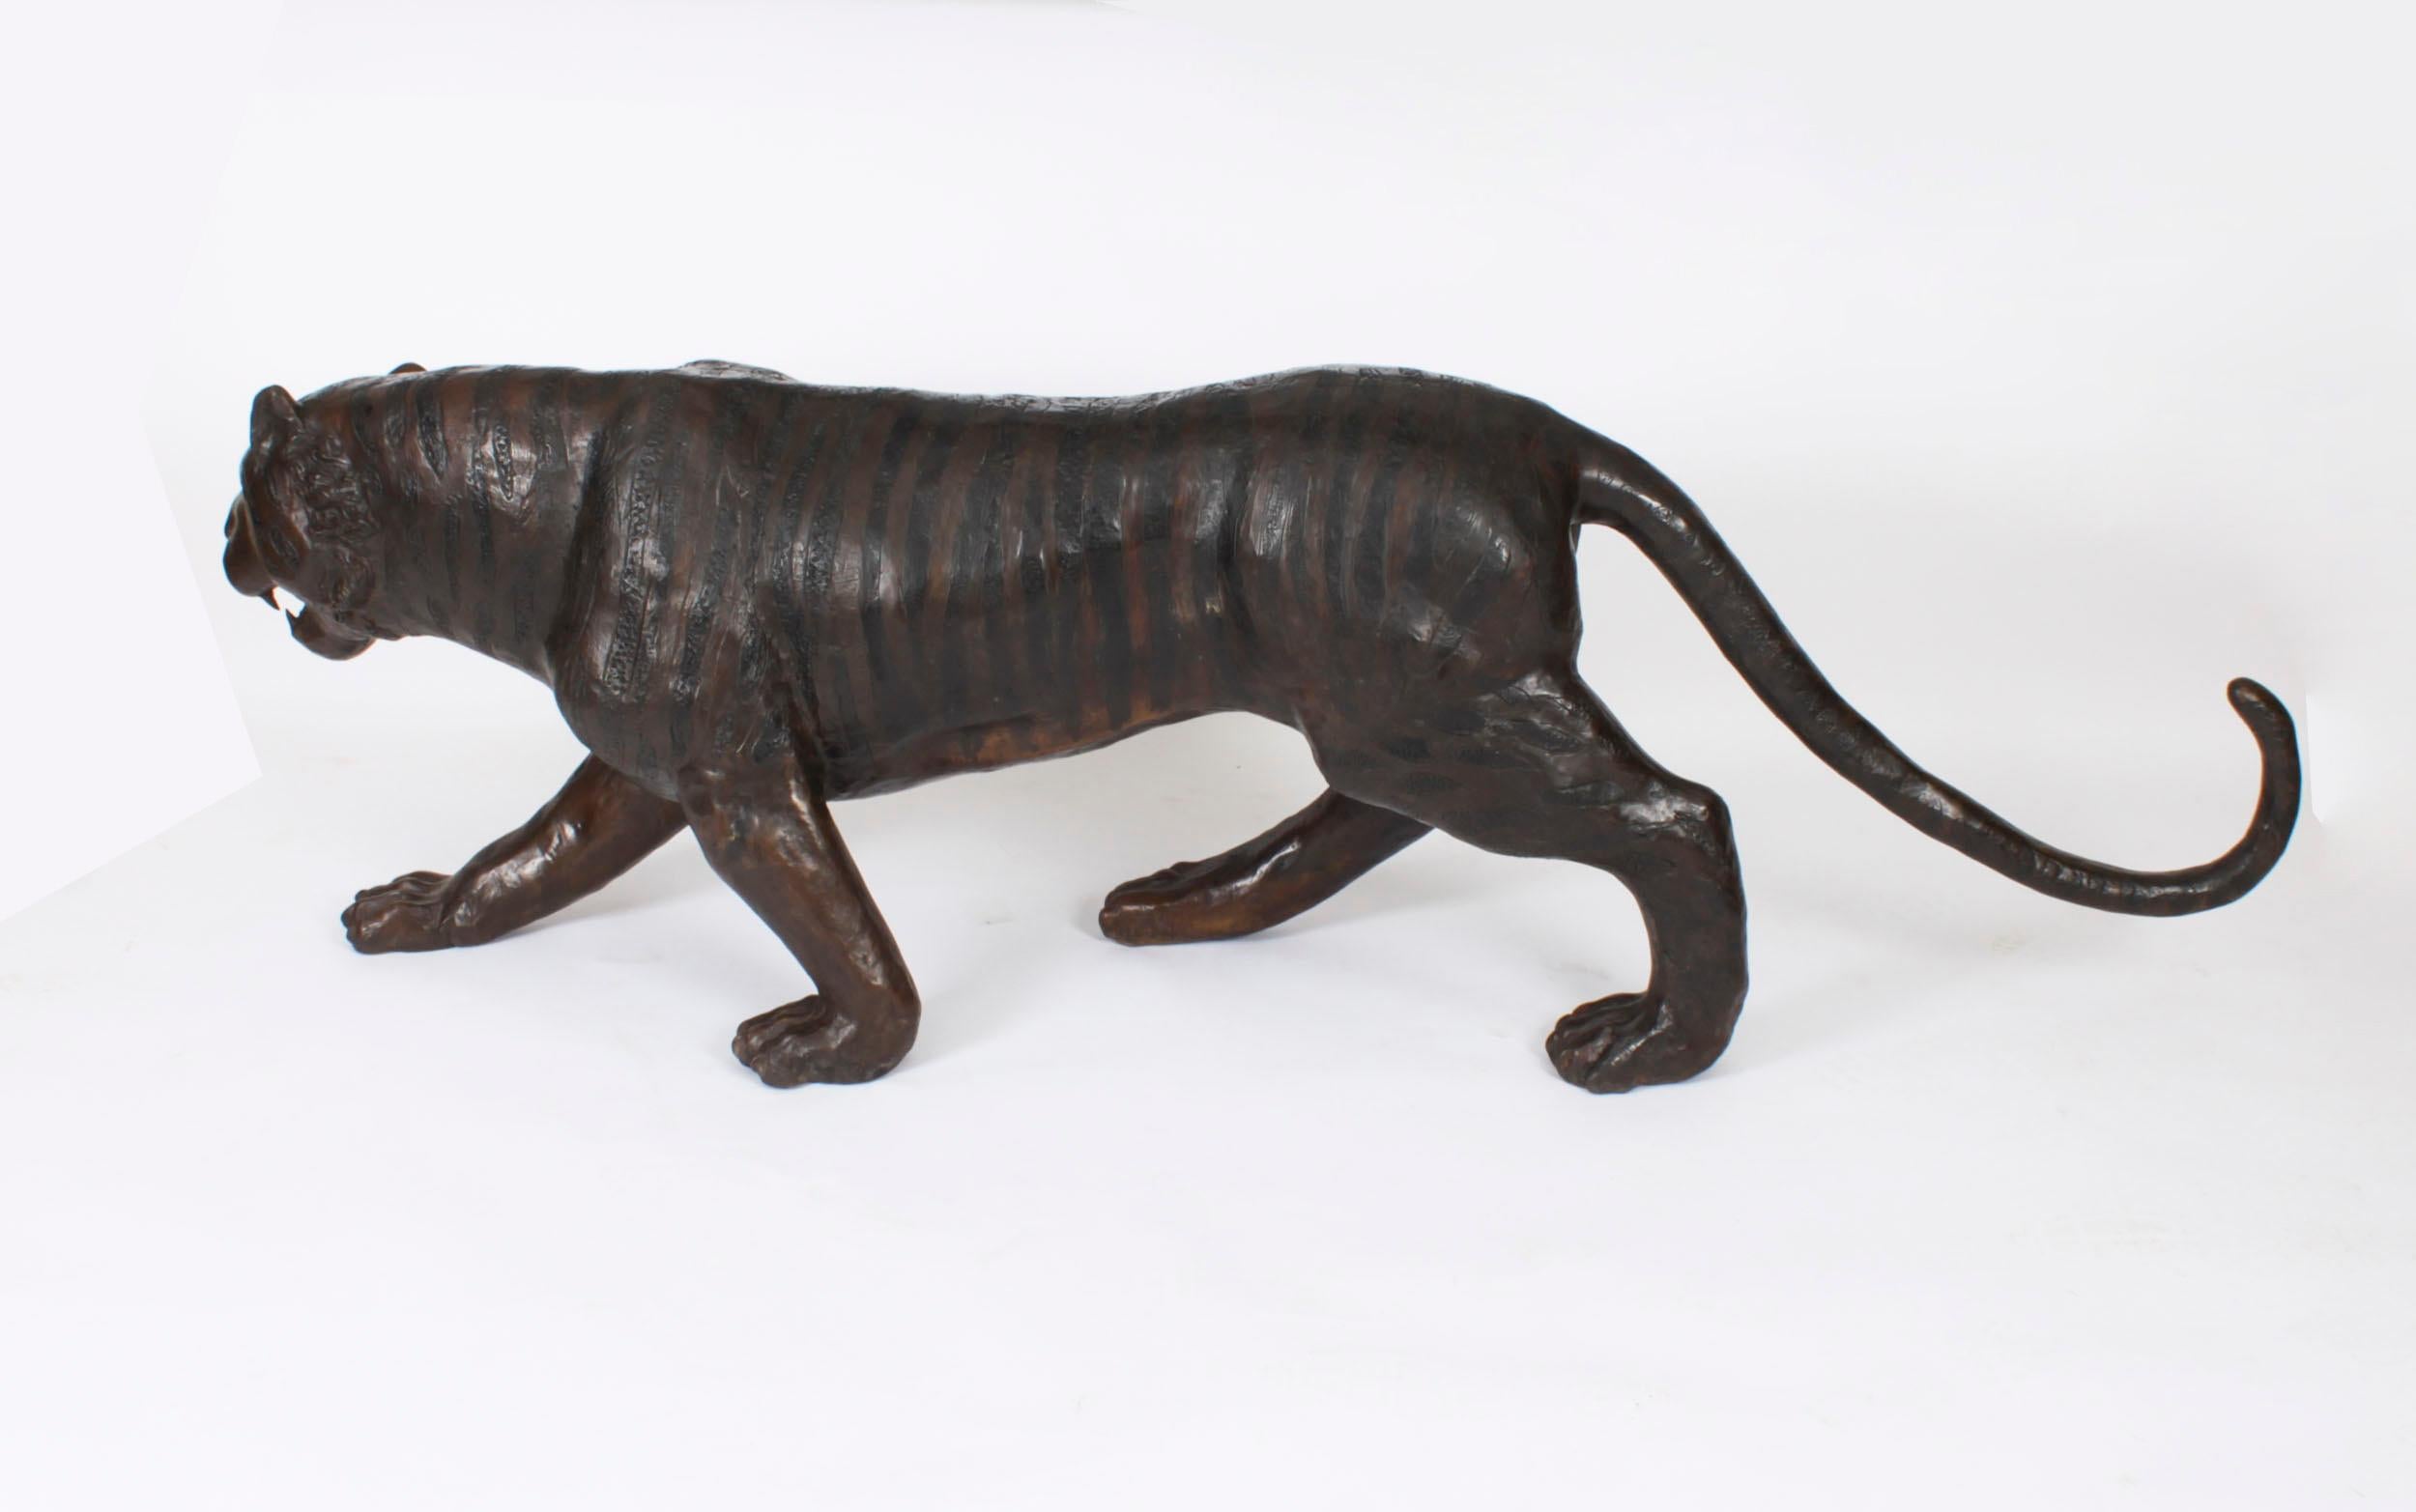 This is a truly impressive life size bronze statue of a tiger dating from the late 20th century. 

The quality of the bronze is second to none and the attention to detail throughout is utterly fantastic.

The sculpture shows a tiger on the prowl